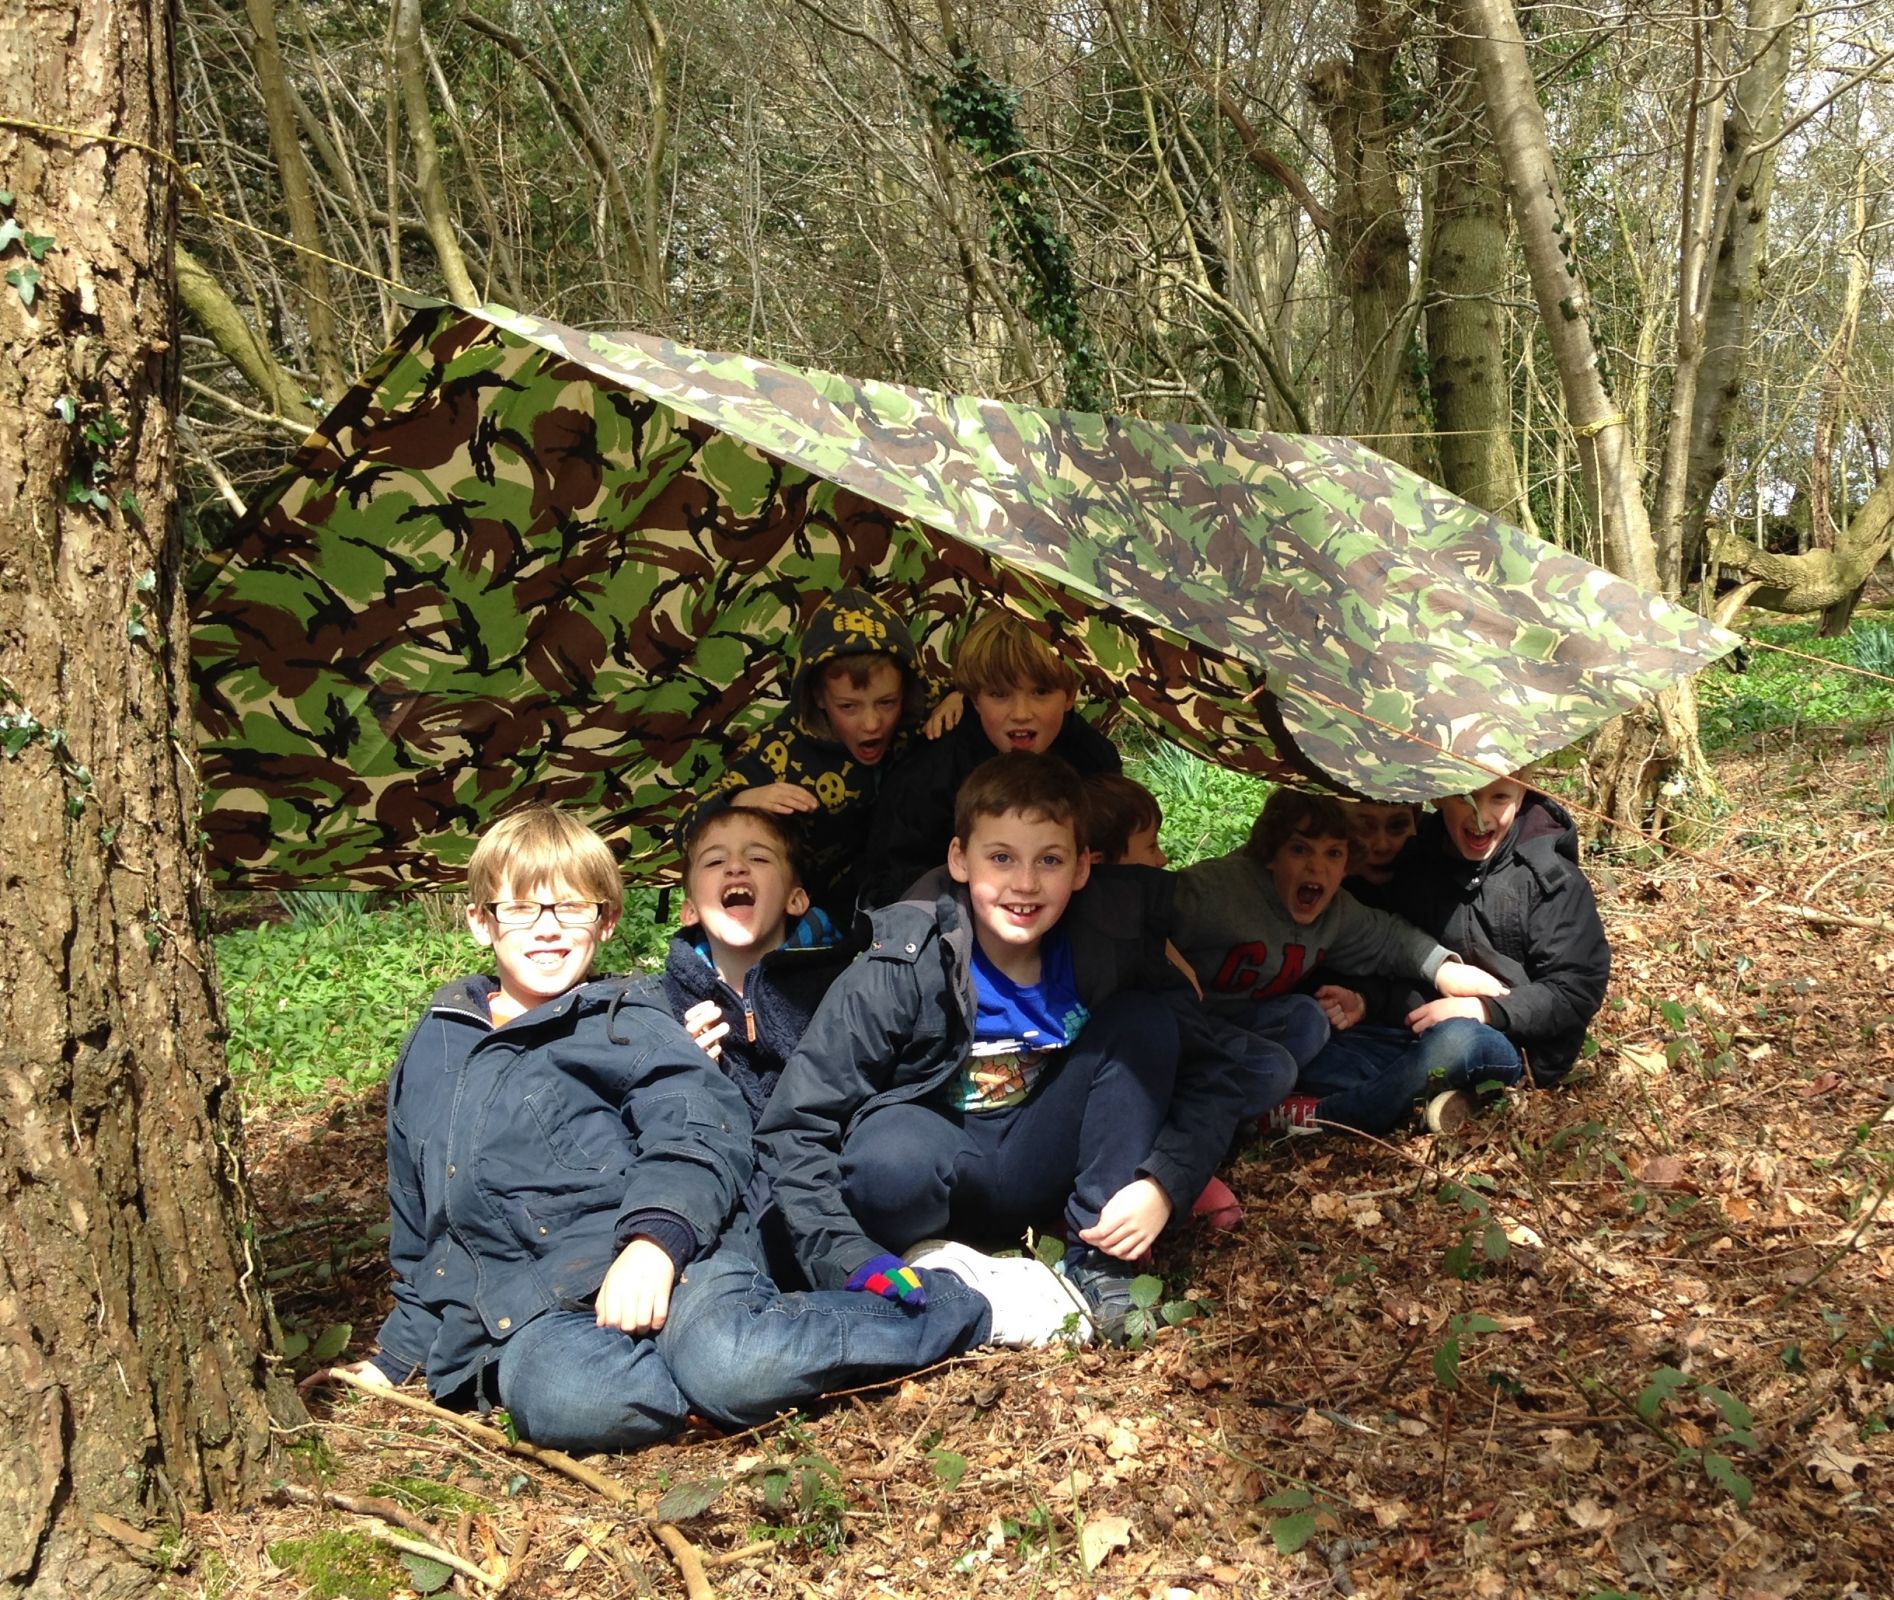 A young bushcraft group.